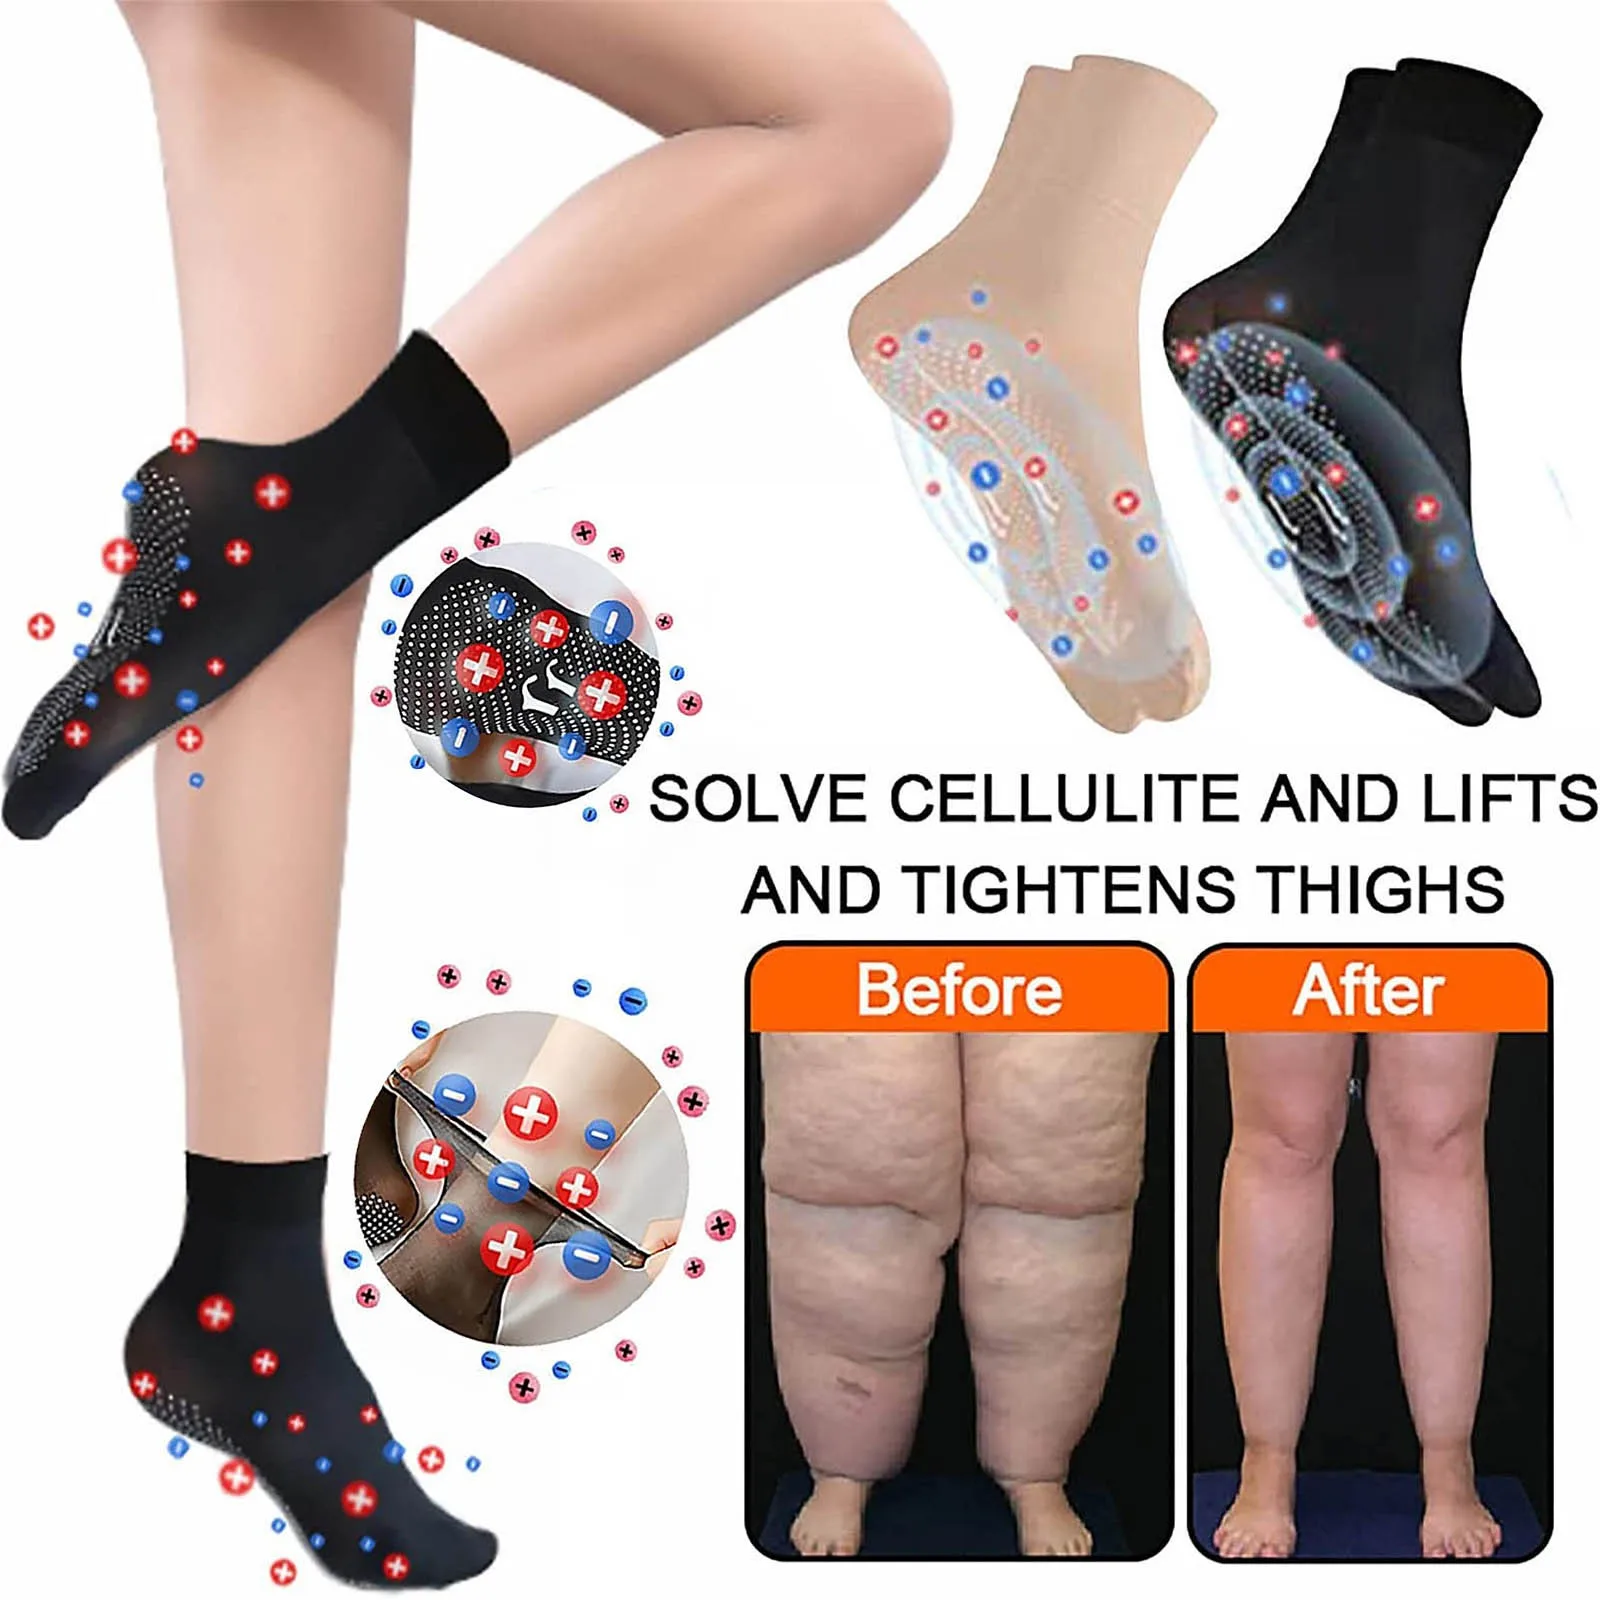 Slimming Health Socks 10Pairs Tourmaline Ionic Body Shaping Stretch Socks With Gel Point Better Blood Circulation Massage Socks